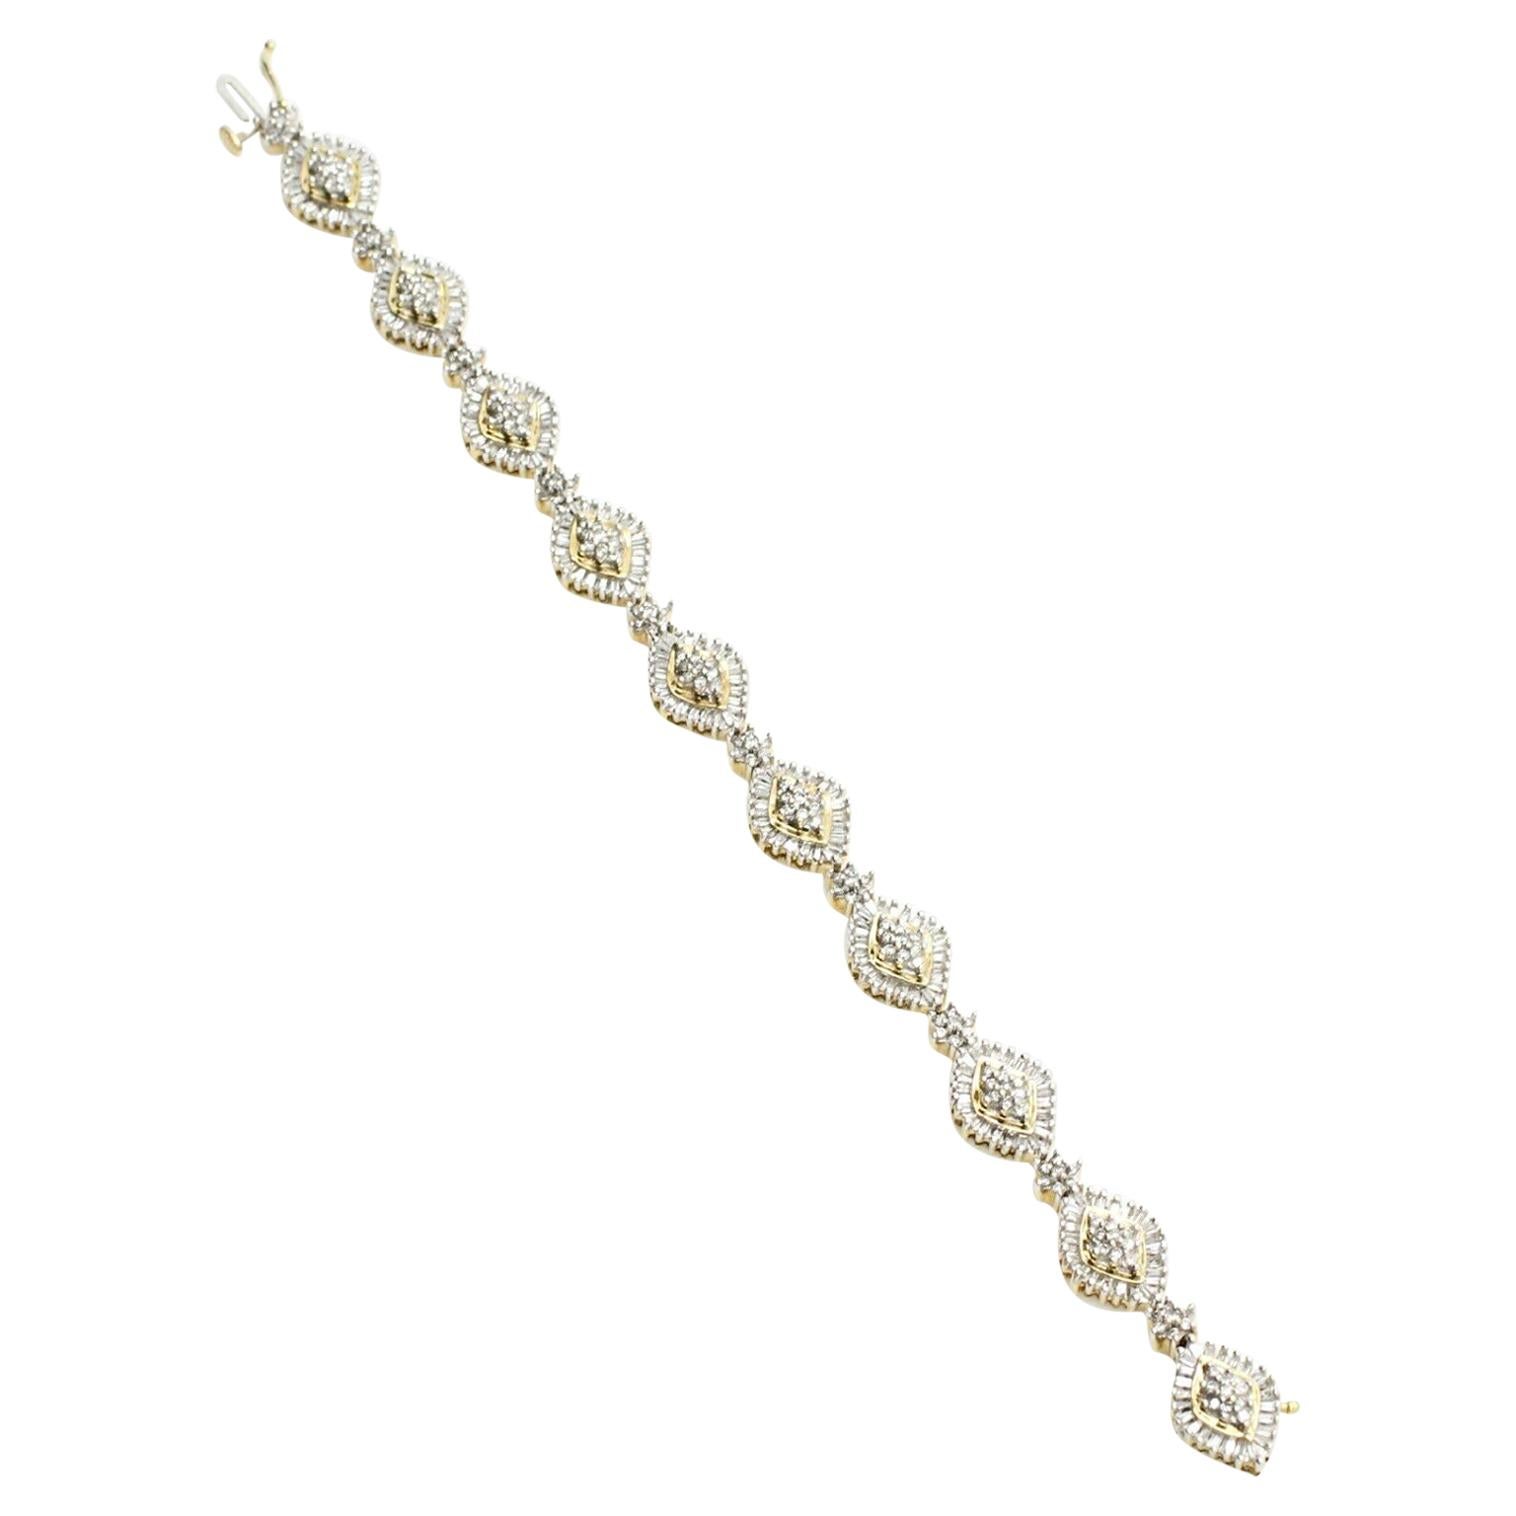 10k Yellow Gold Baguette and Round Diamond Bracelet